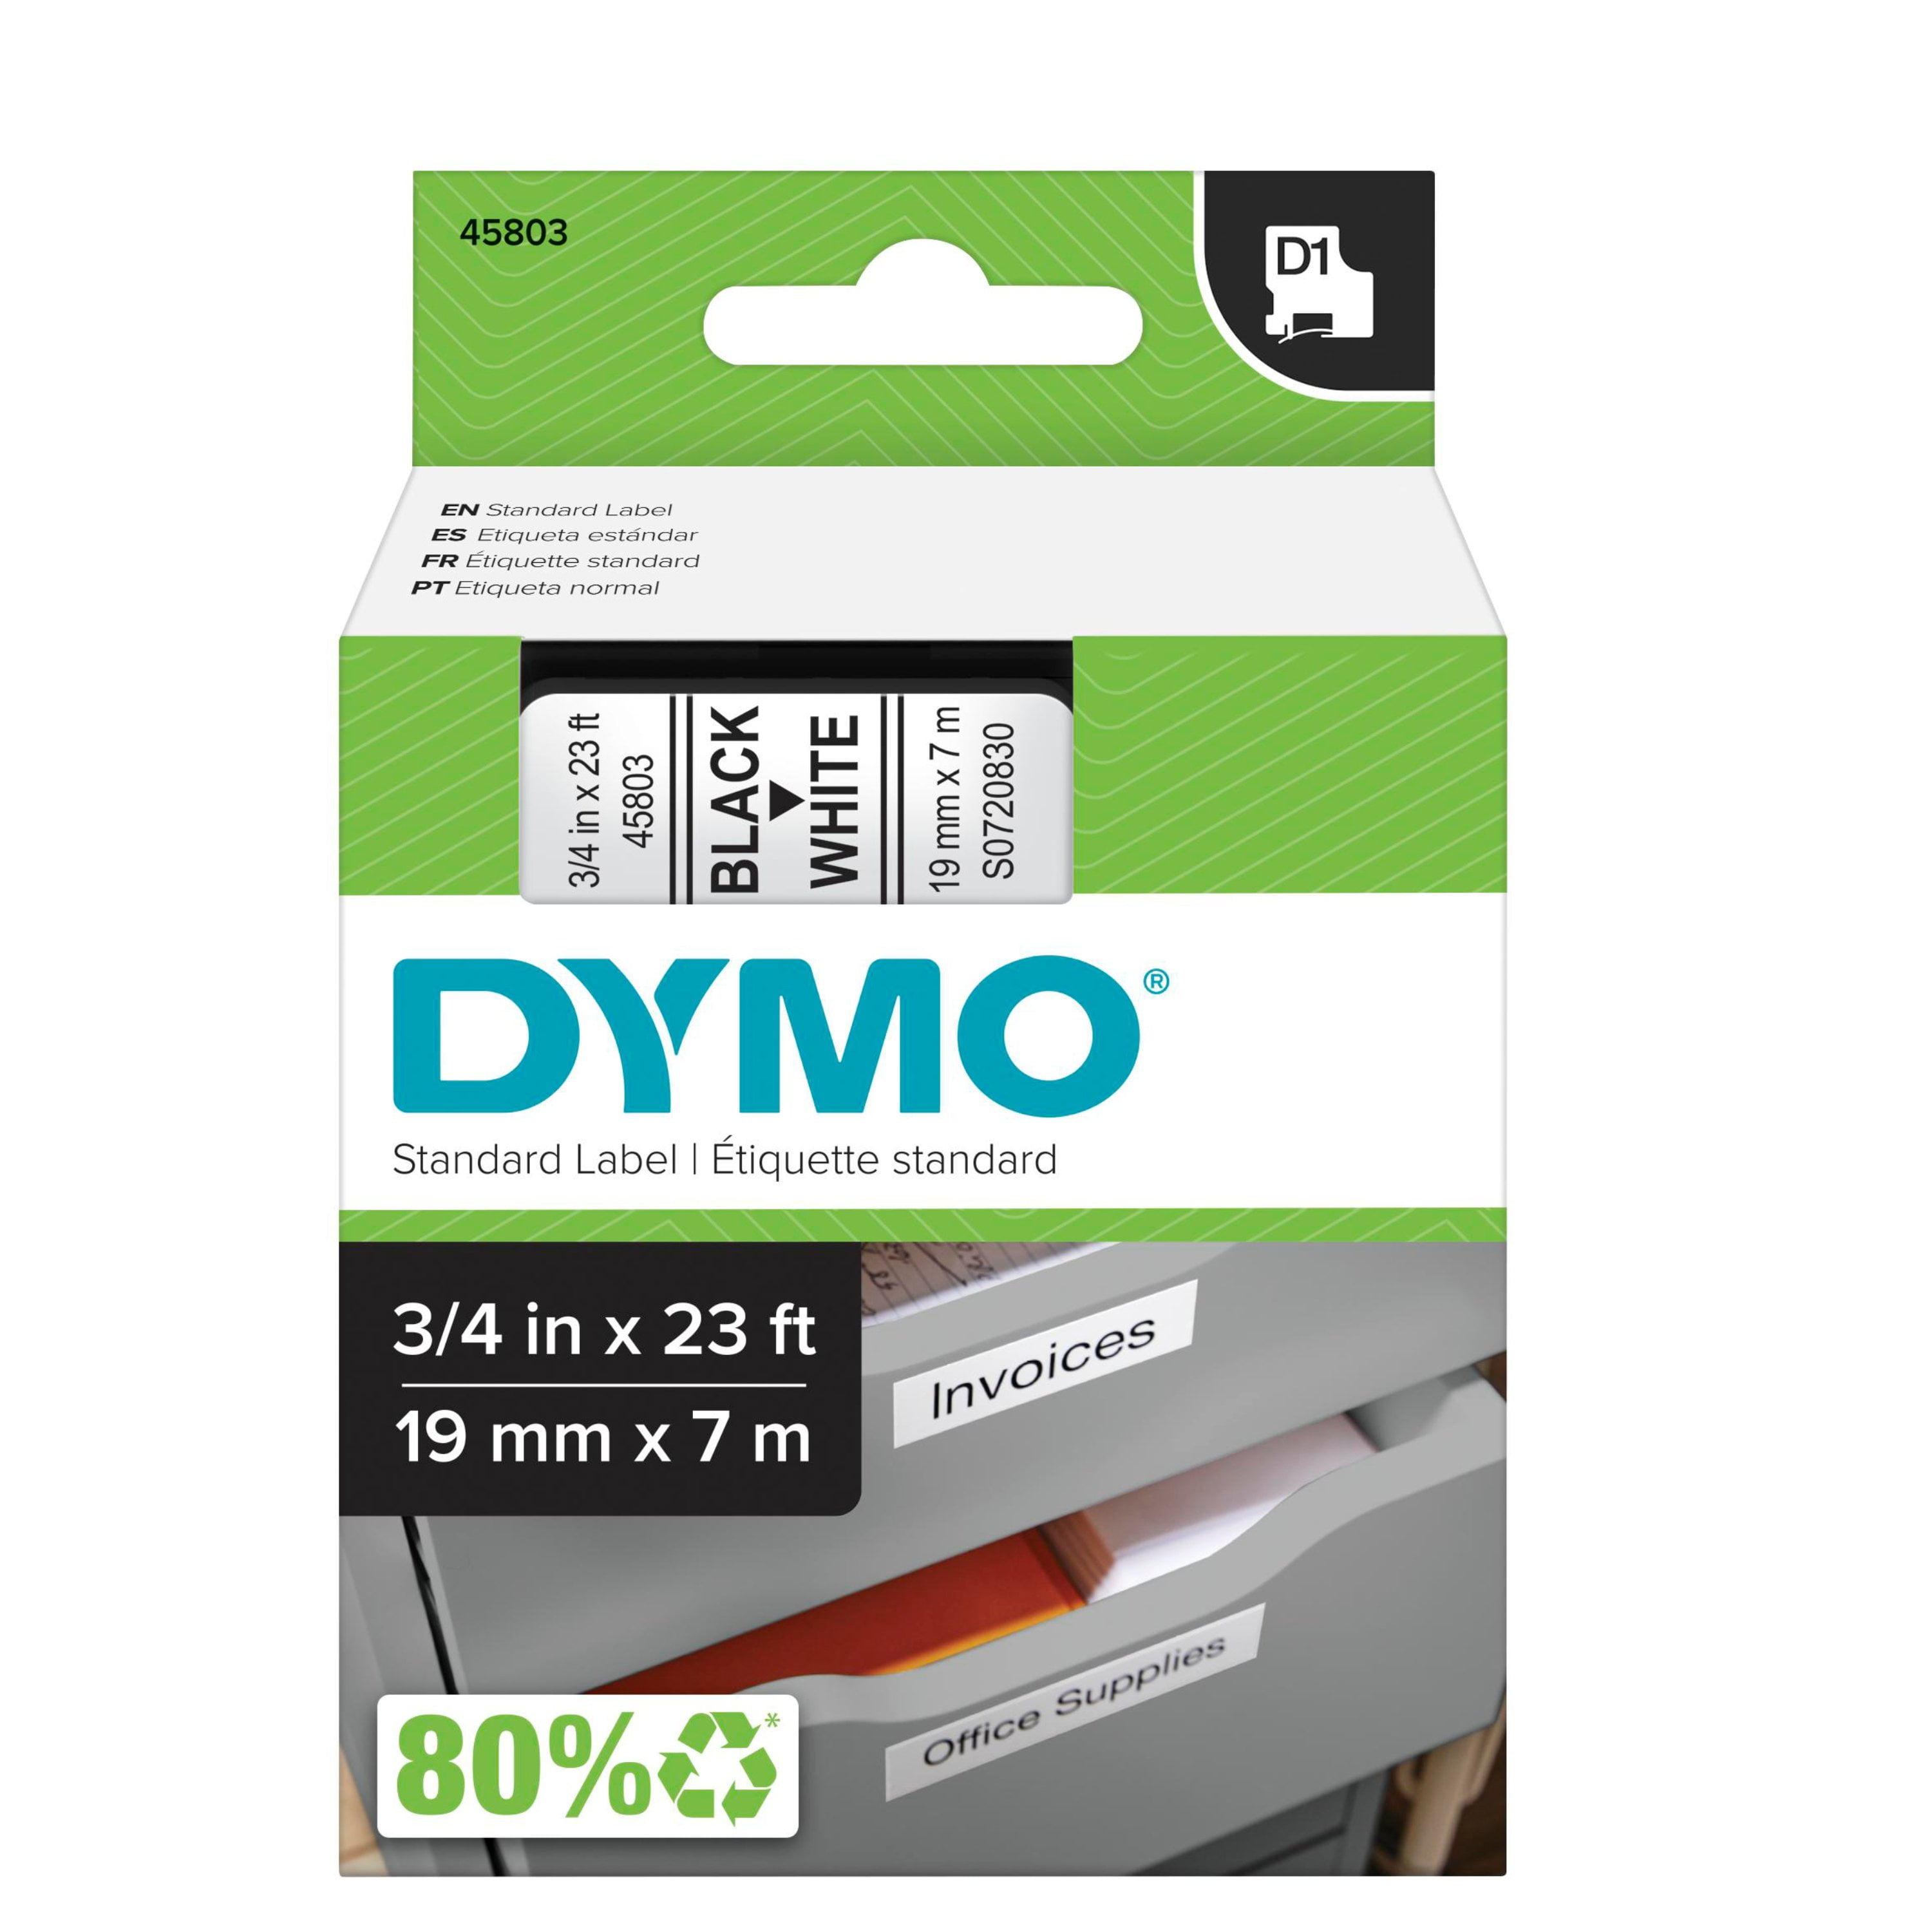 DYMO High Performance Polyester Removable Label Tape, 3/4 x 23', Black on  White